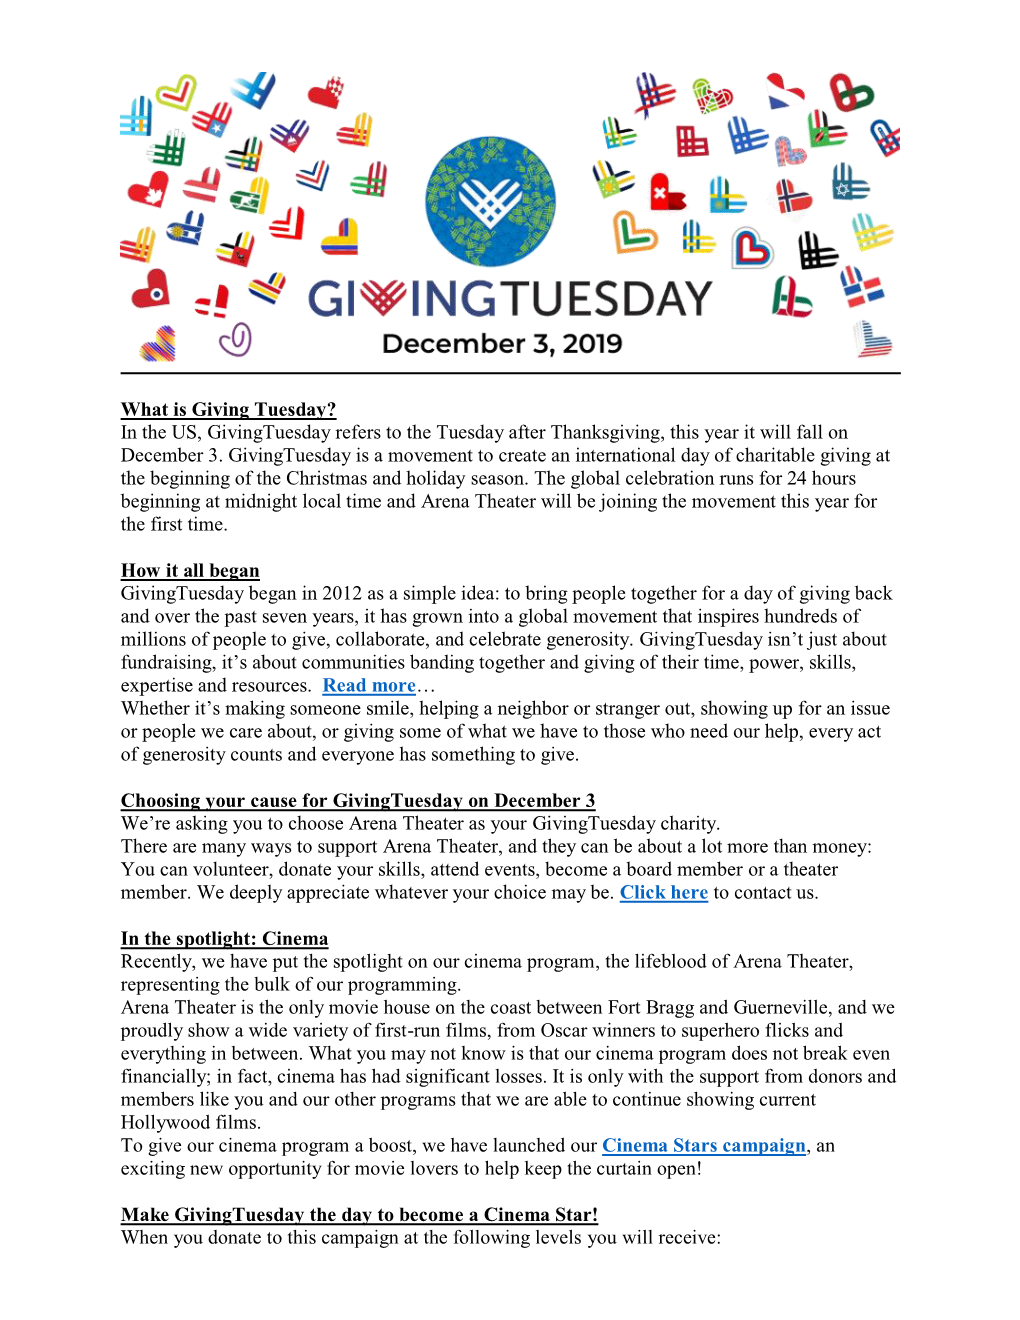 What Is Giving Tuesday? in the US, Givingtuesday Refers to the Tuesday After Thanksgiving, This Year It Will Fall on December 3